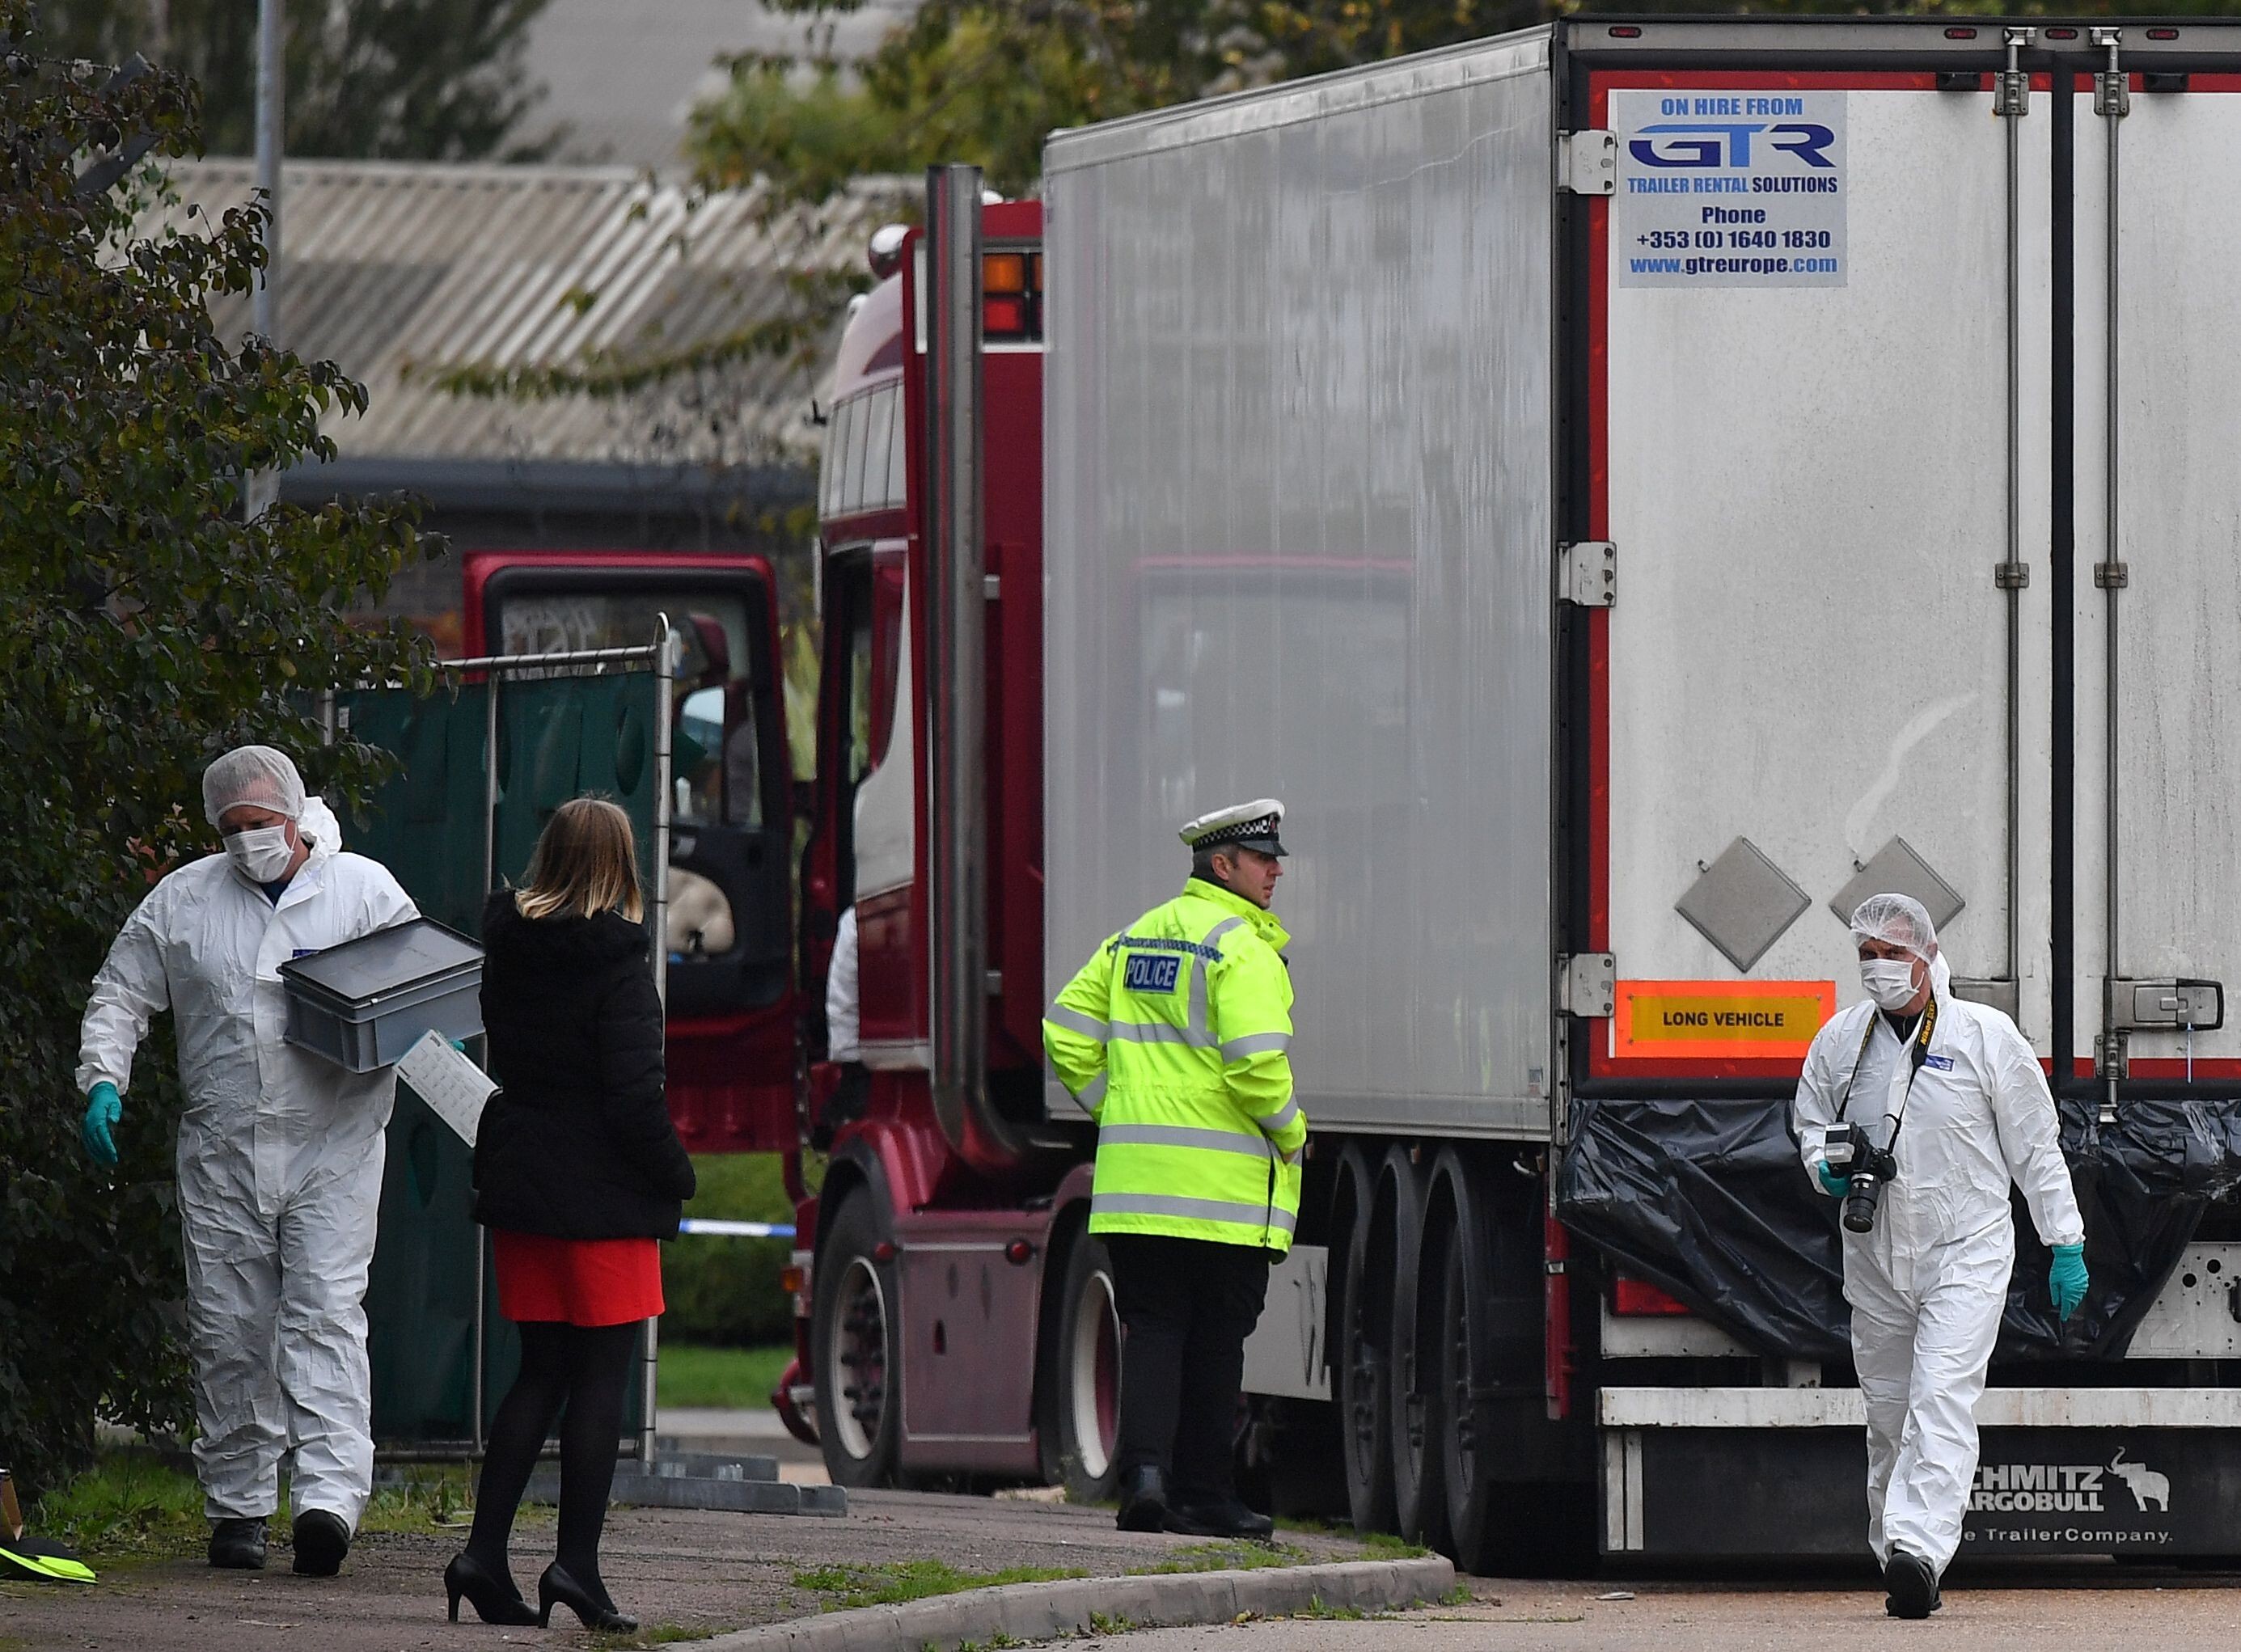 British forensics officers work on the truck, which was found to contain the bodies of 39 people, at an industrial estate east of London on October 23, 2019. Photo: AFP